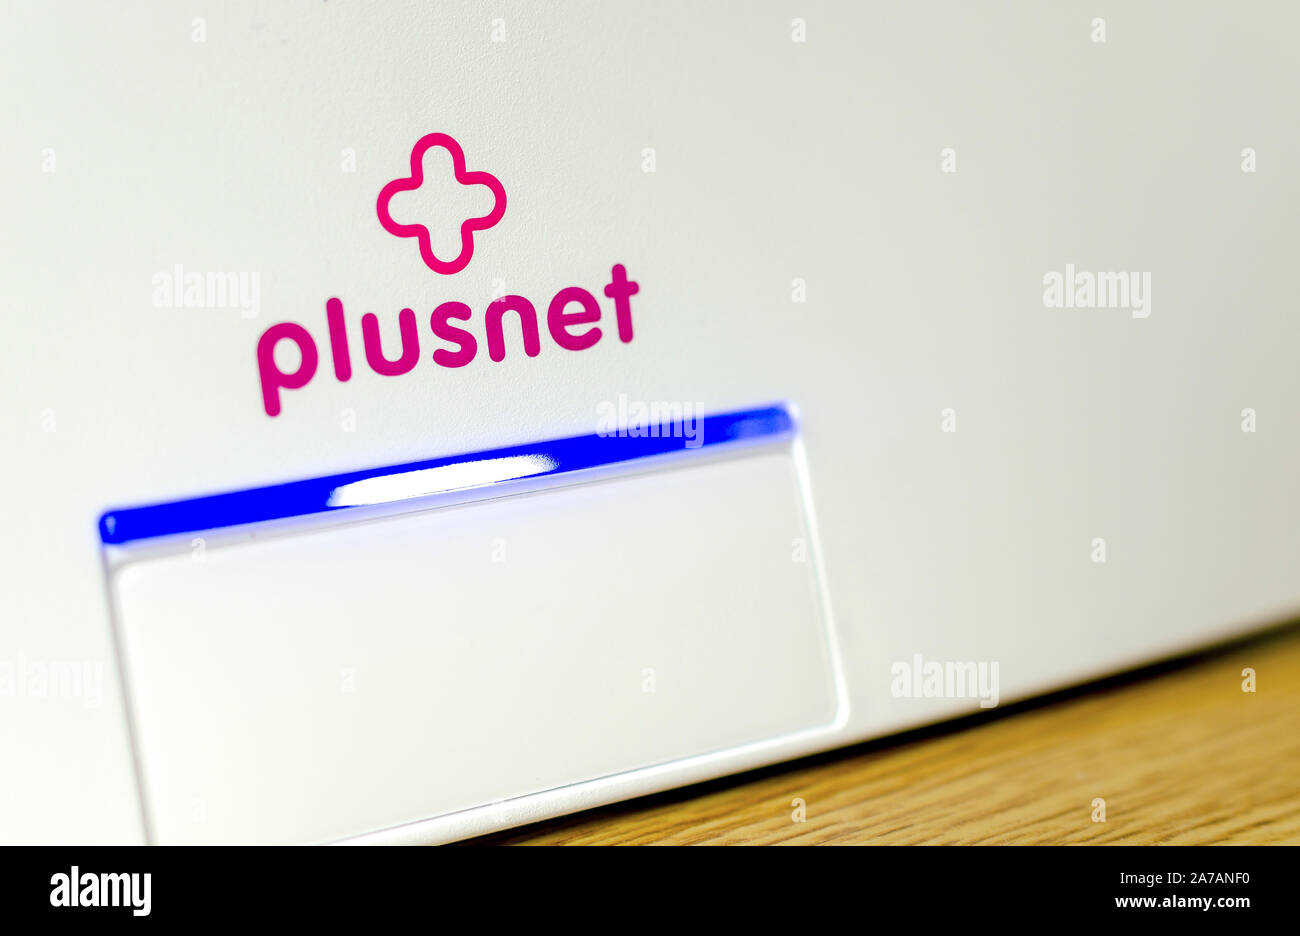 Plusnet logo seen on the WiFi router. Plusnet is a British internet service provider, offering broadband, landline and mobile services. Stock Photo